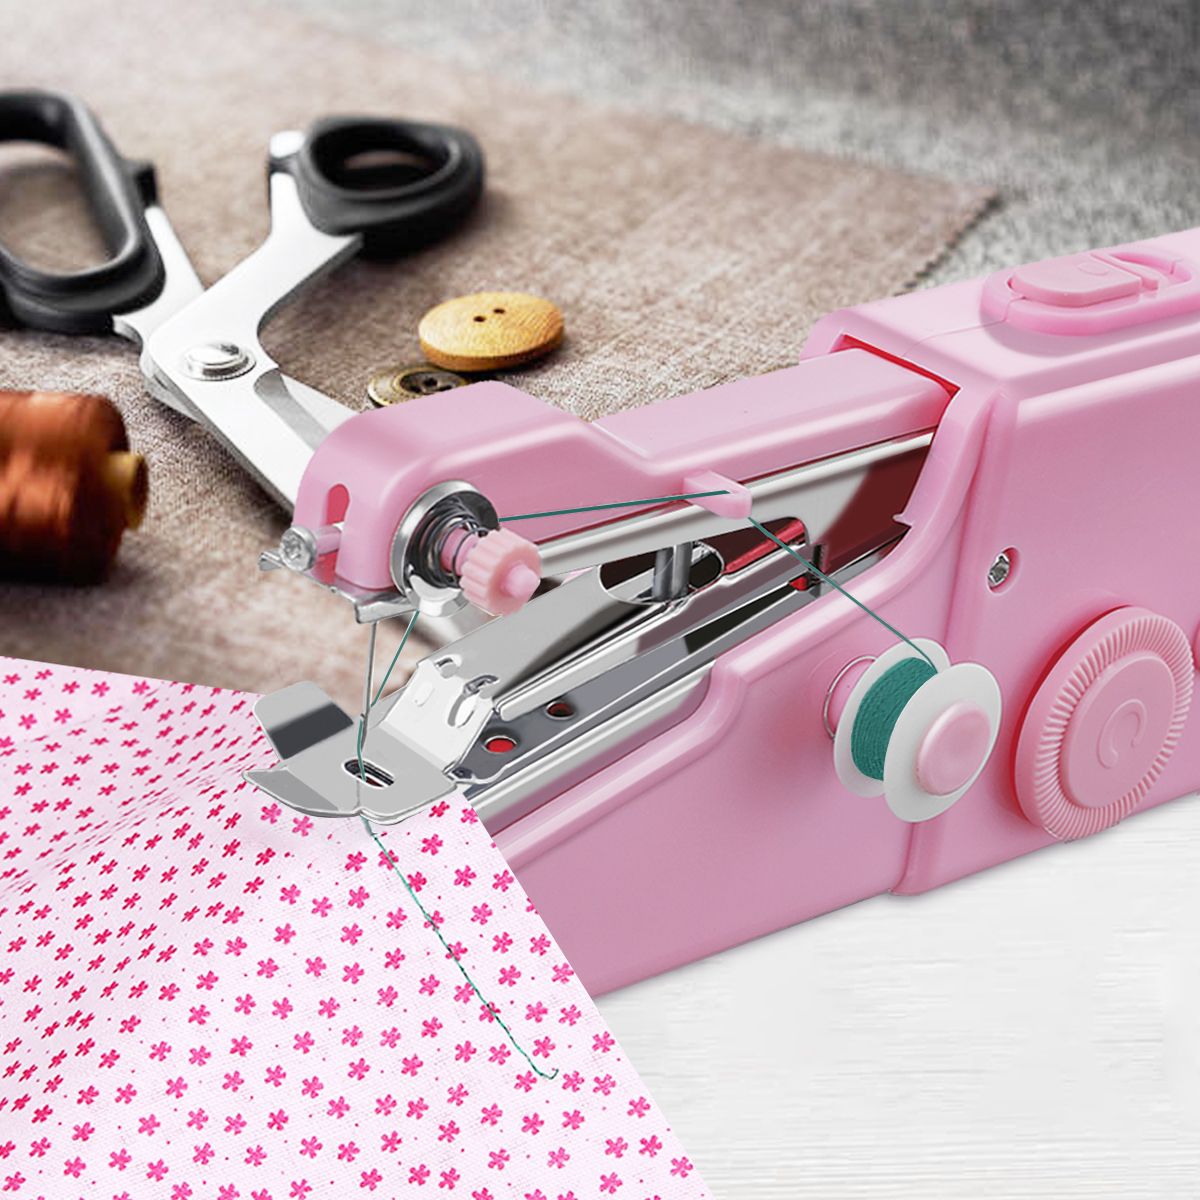 Handheld-Sewing-Machine-Mini-Cordless-Portable-Electric-Sewing-Stitch-Tools-for-Fabric-Kids-Pet-Clot-1595025